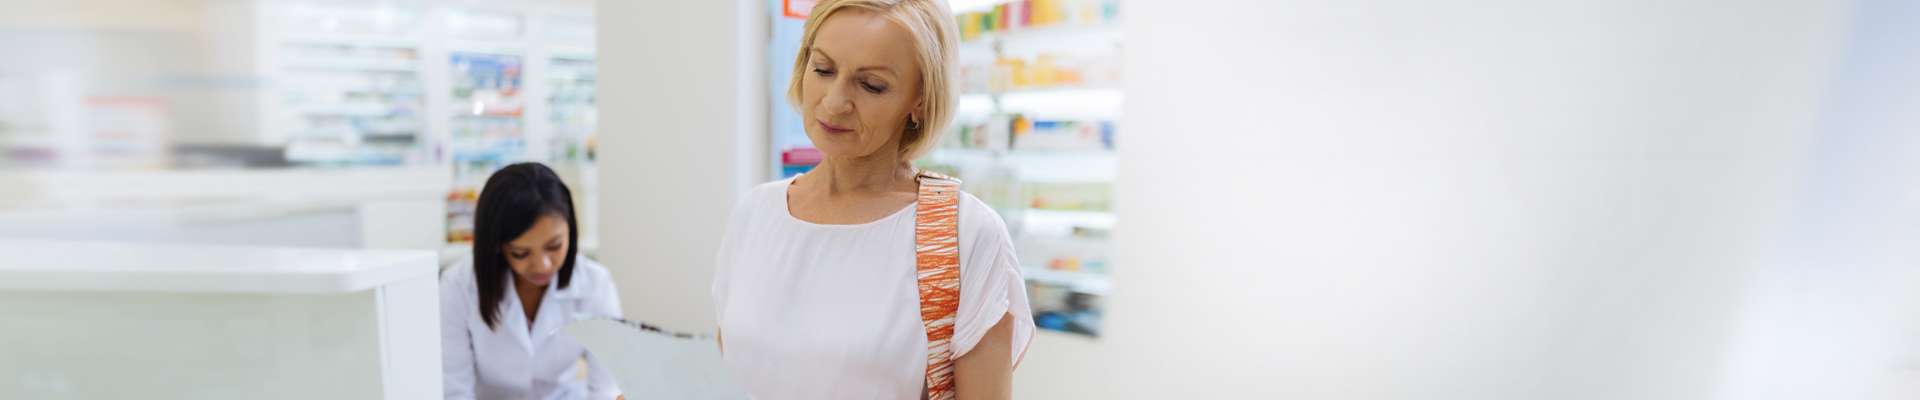 Woman looking at prescription at doctors’ office with health care provider in background